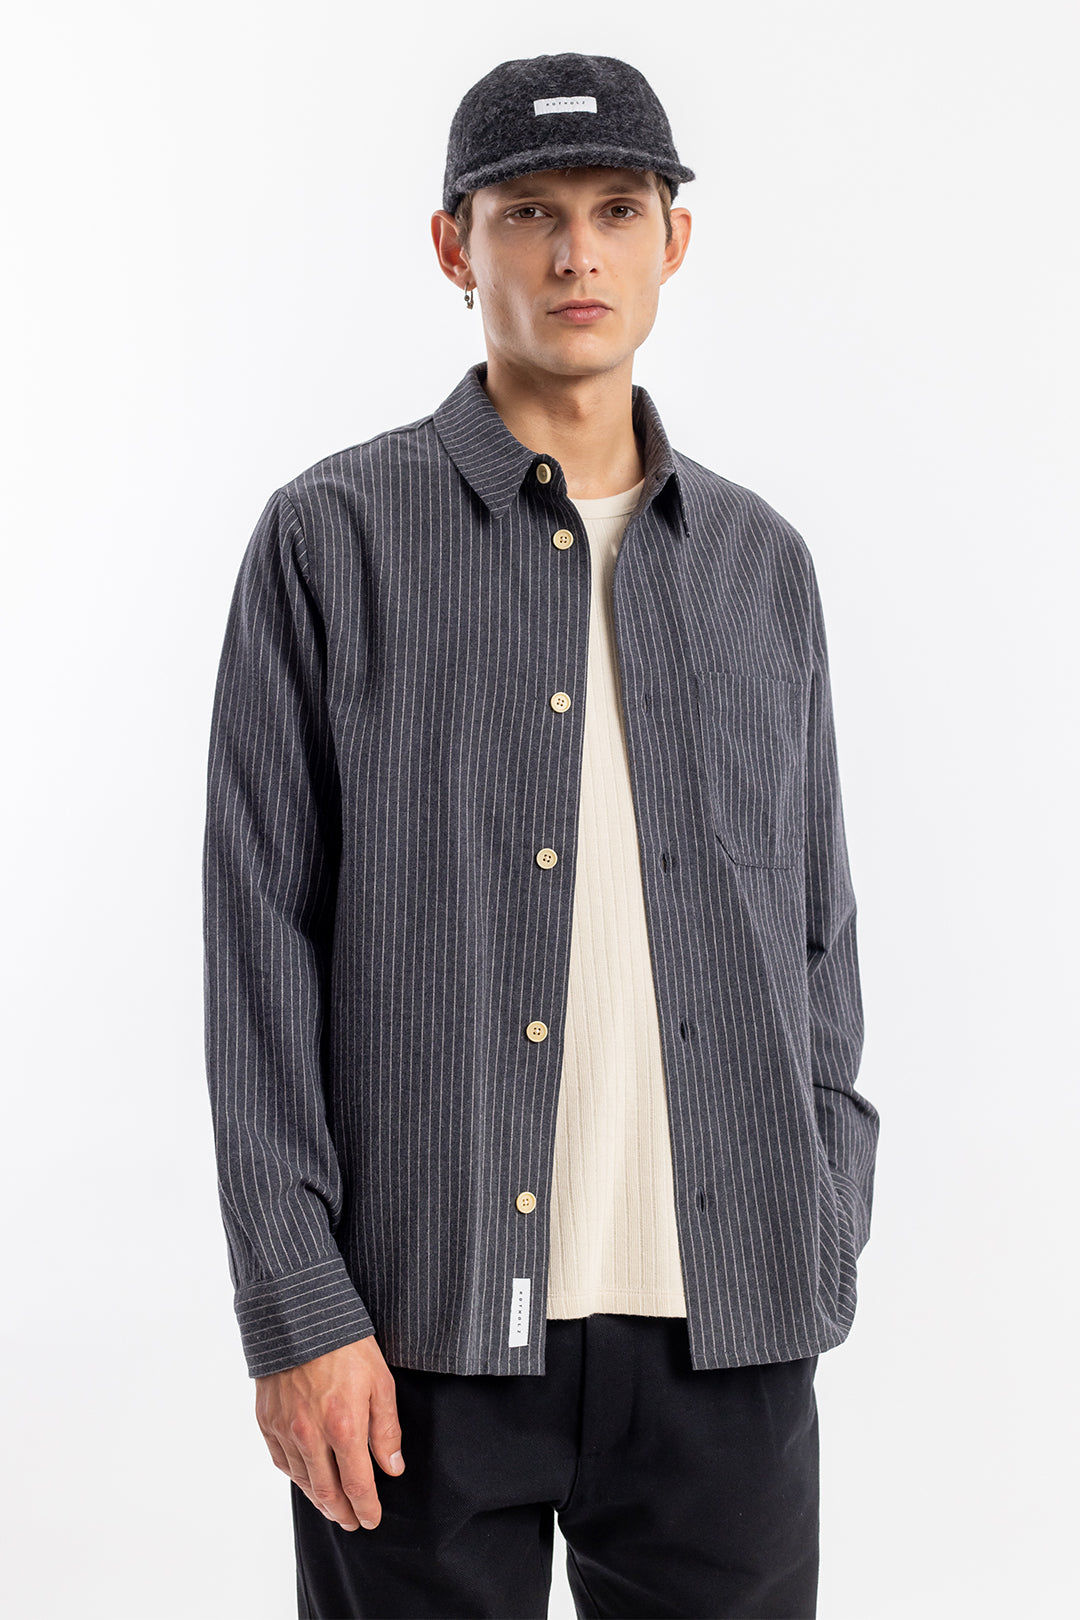 Anthracite, striped cotton shirt from Rotholz